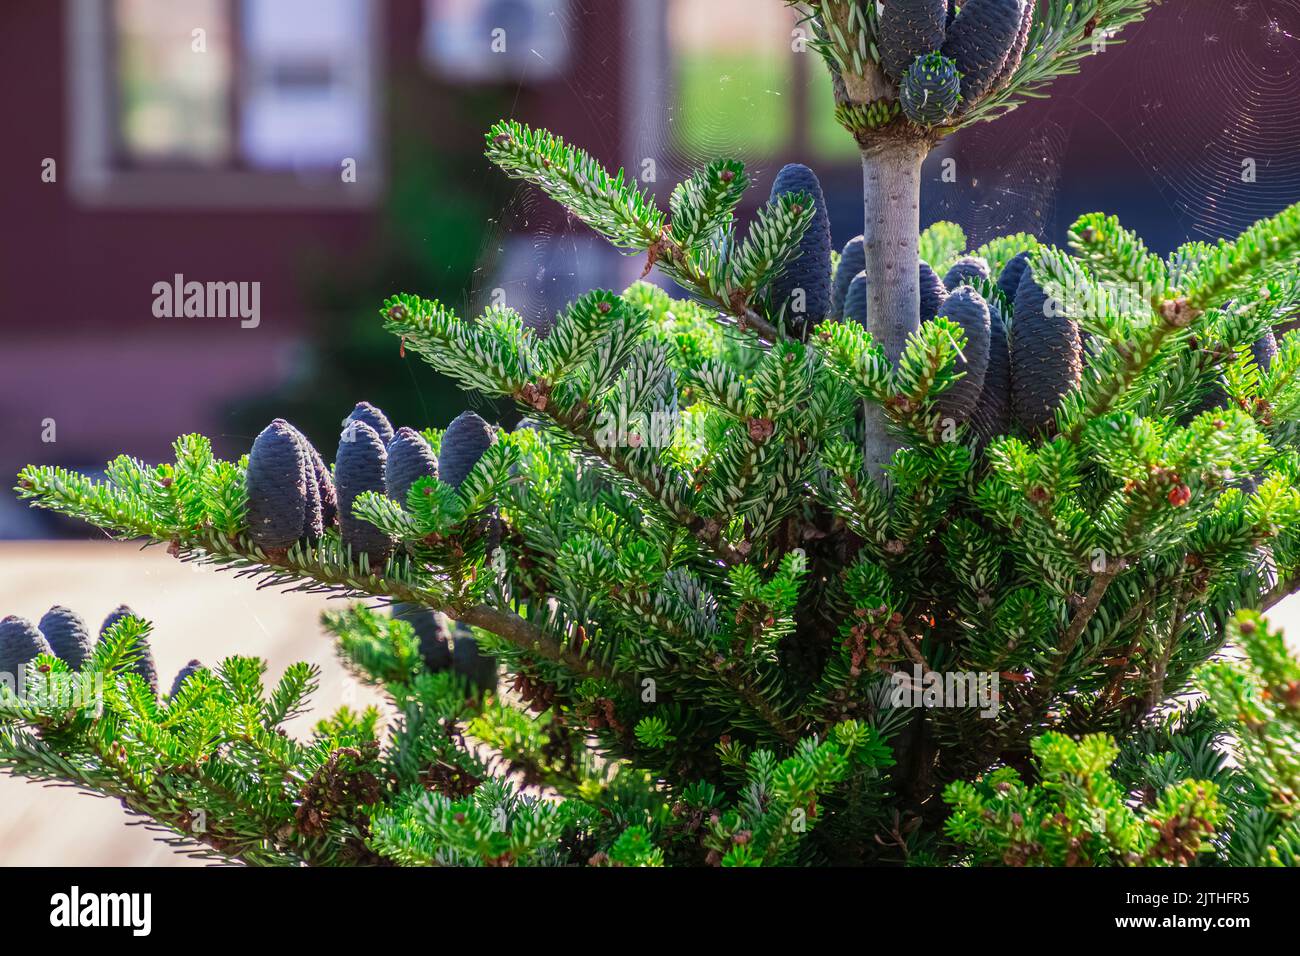 Korean white fir silverlock with blue cones in web. Abies Korea fir branch with young blue lumps. Selective focus. Nature ecology concept, copy space Stock Photo